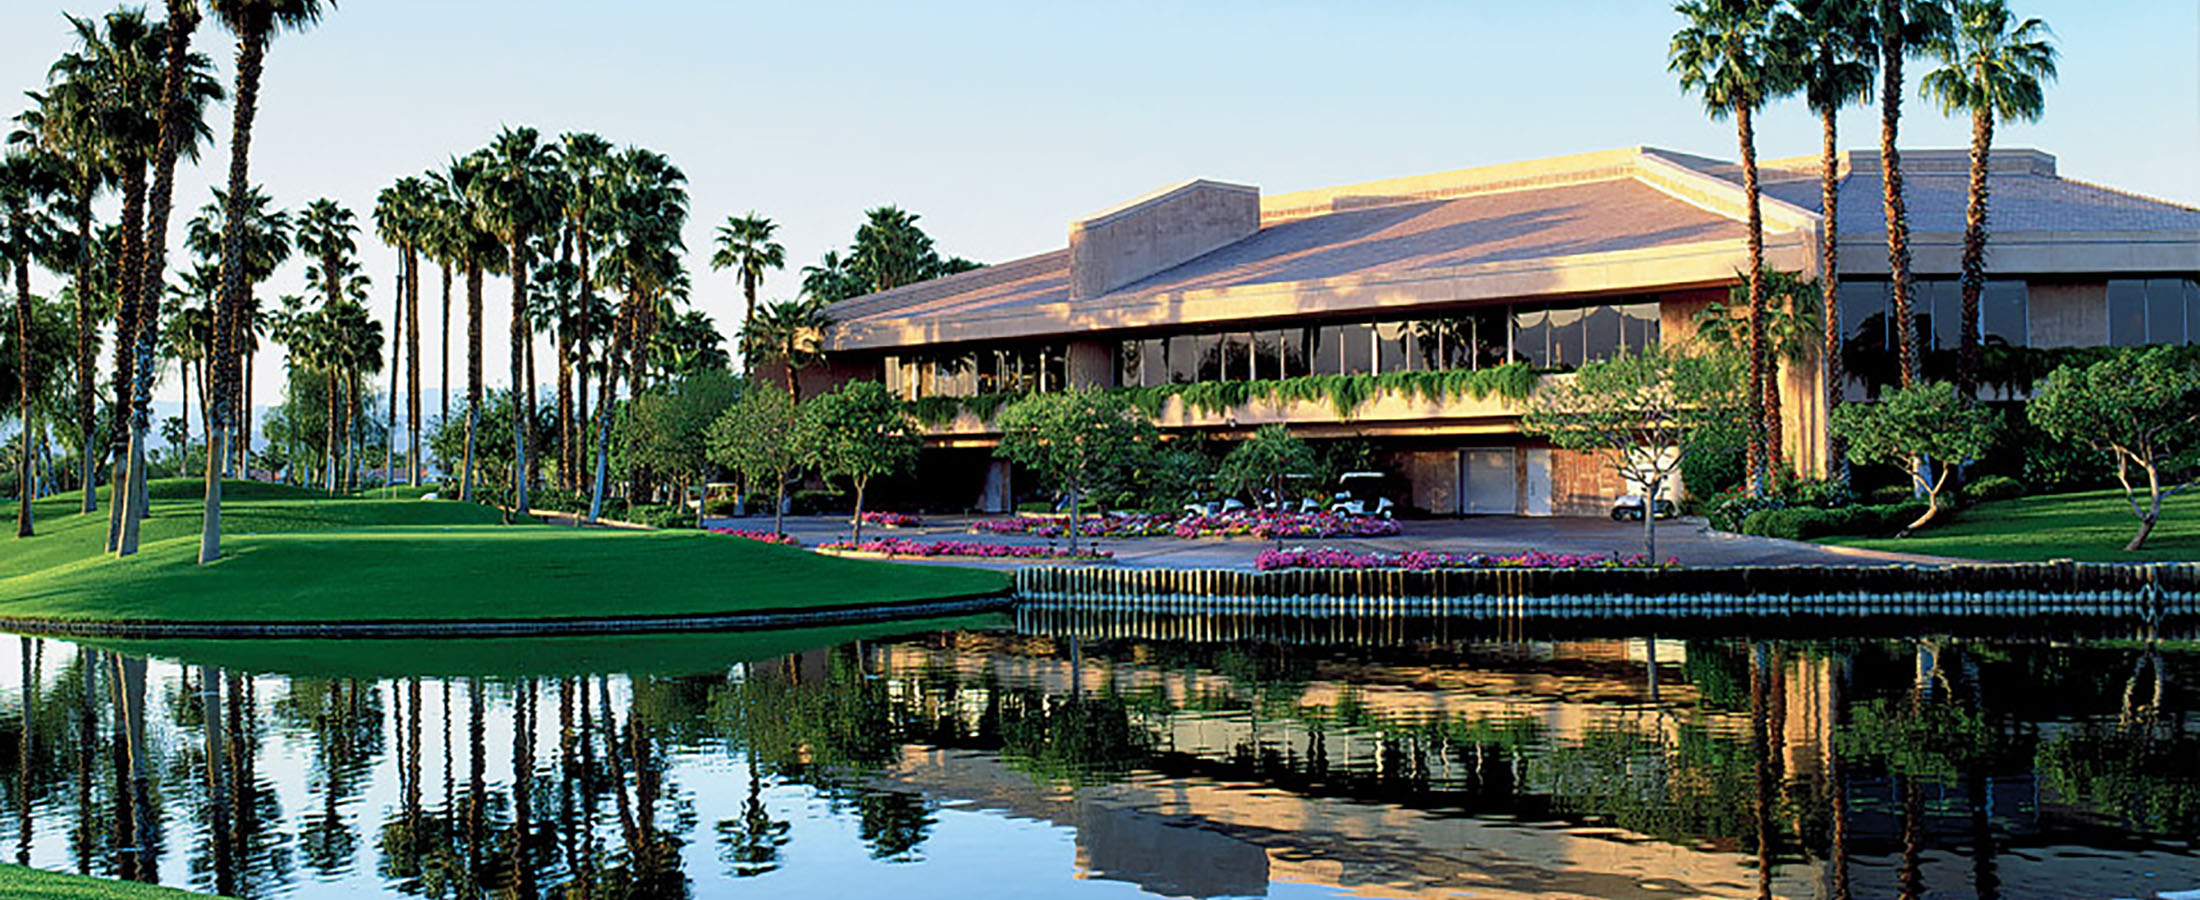 The Palm Valley Country Club clubhouse thumbnail